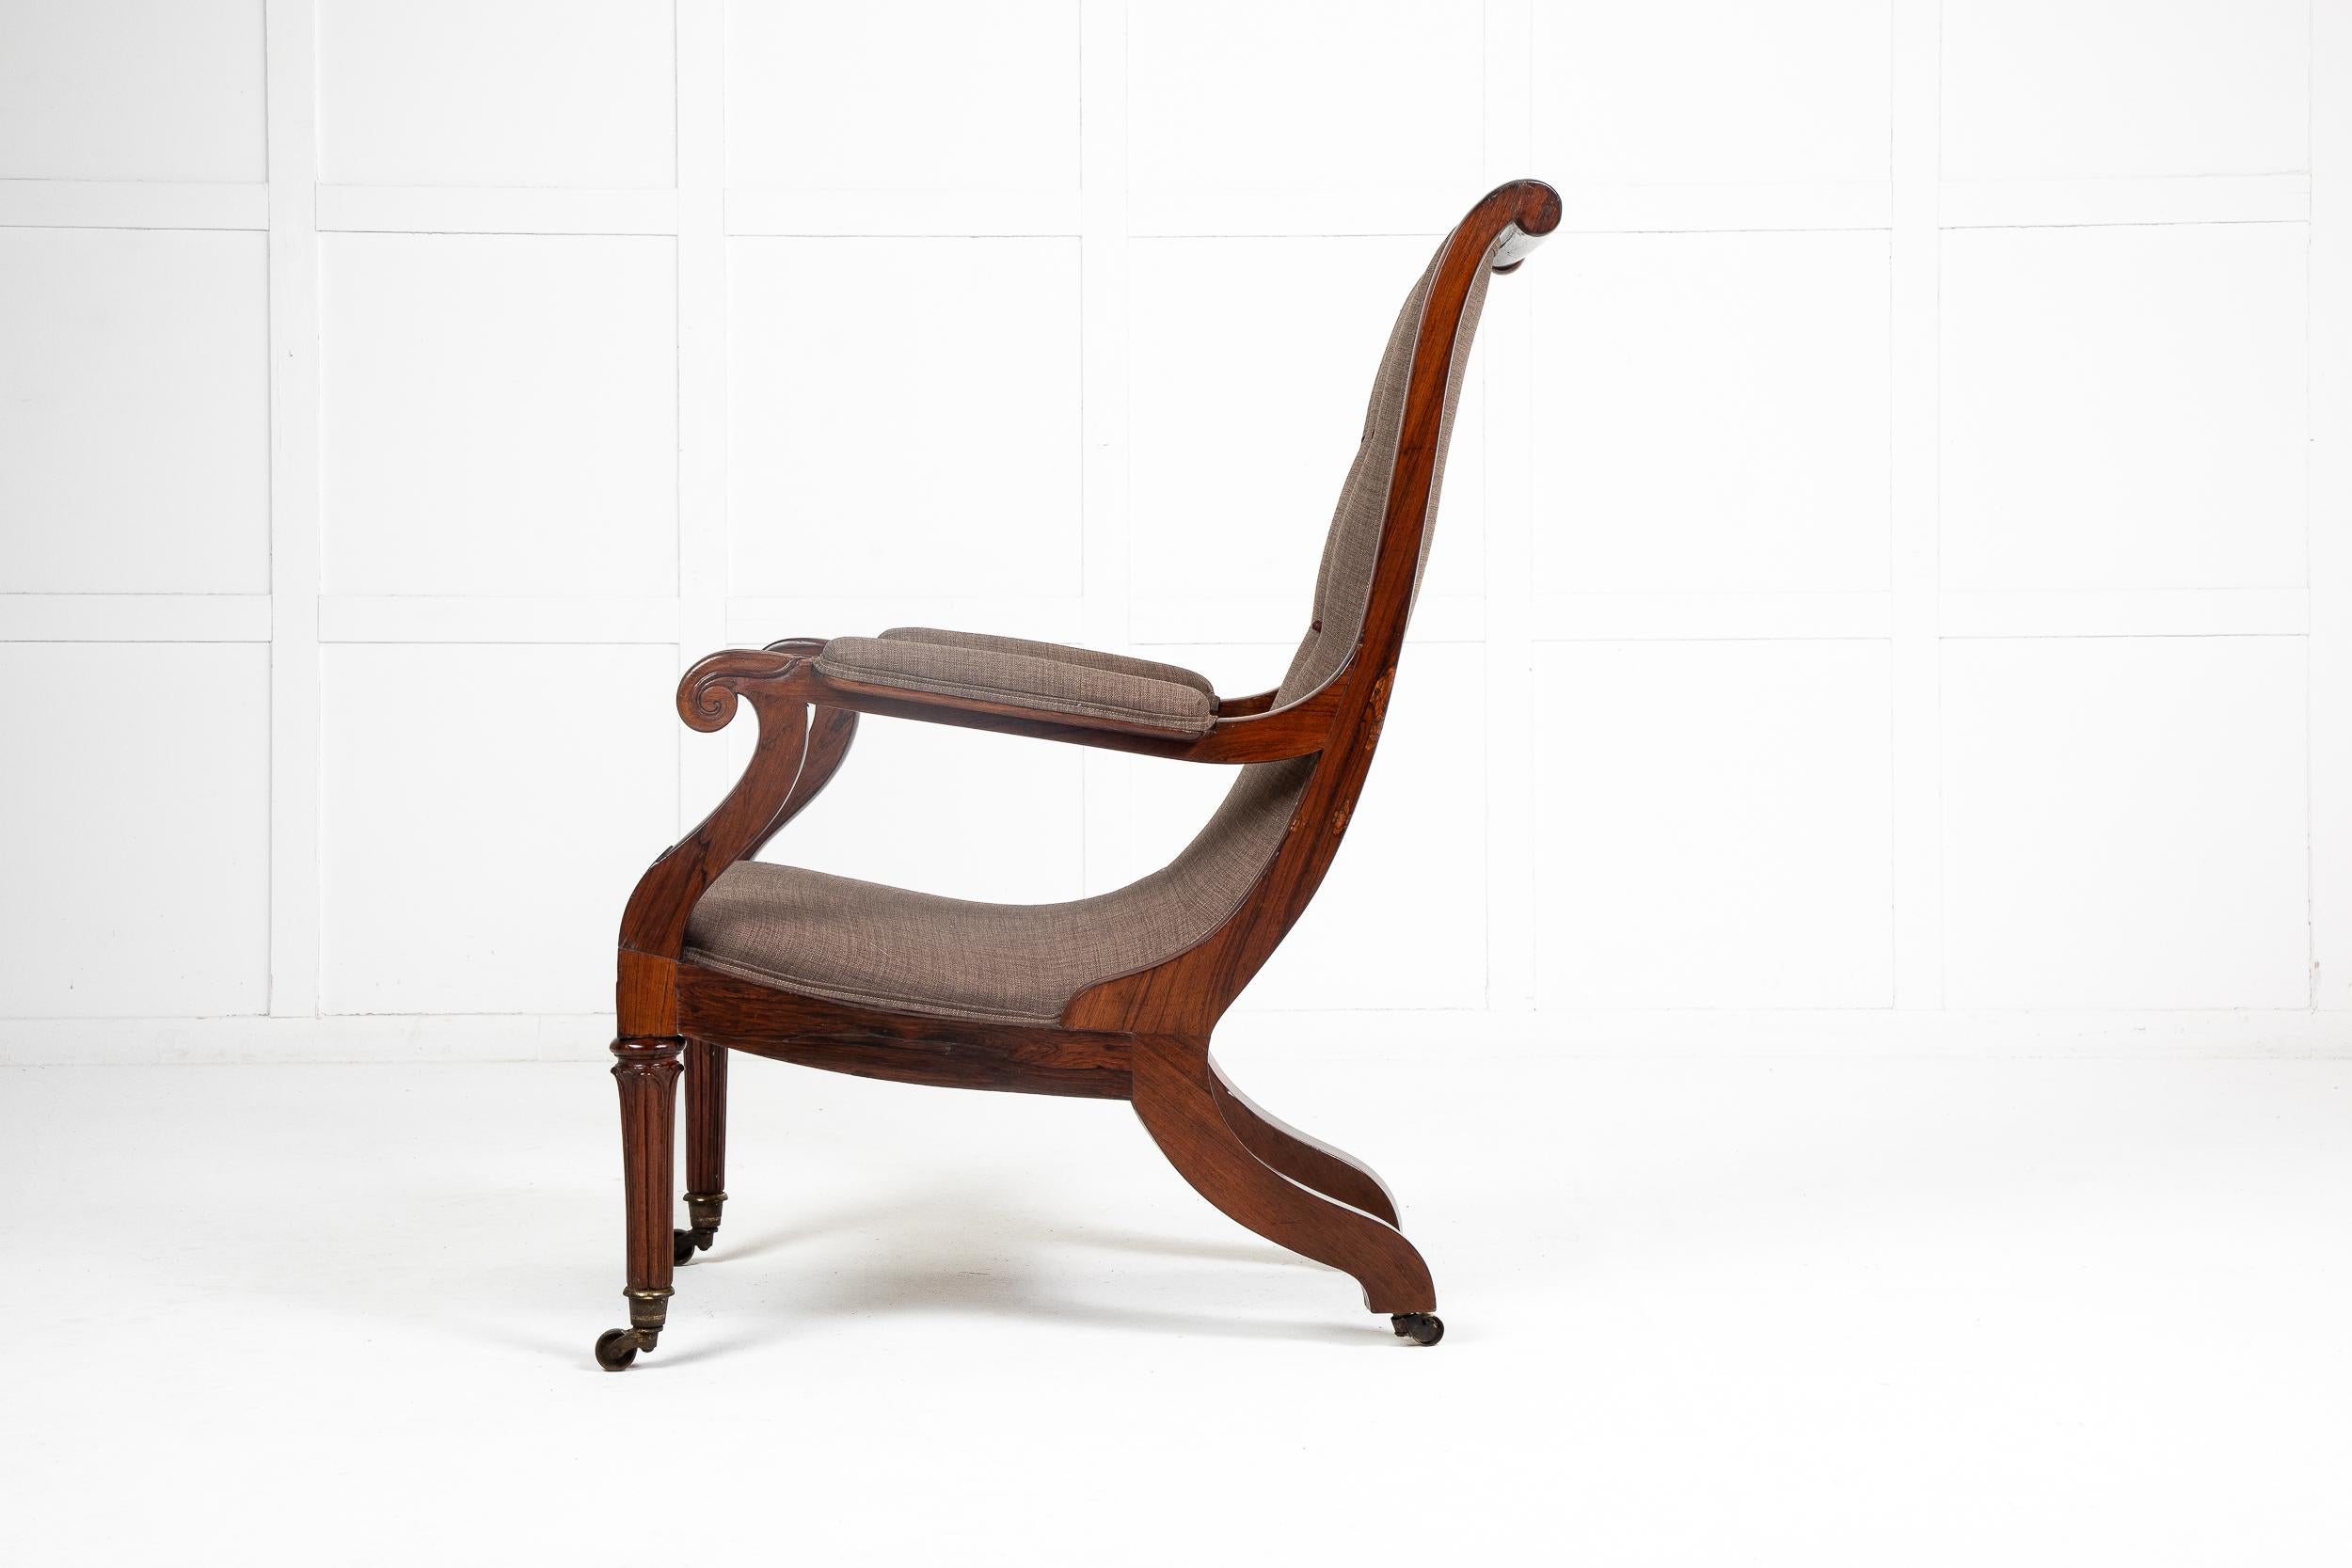 19th Century English Regency rosewood armchair. The whole of the scroll top back and the seat join together in a sweeping curve to give it its elegant shape. Having scrolled arm ends and padded armrests. Raised on outswept back legs and long, turned